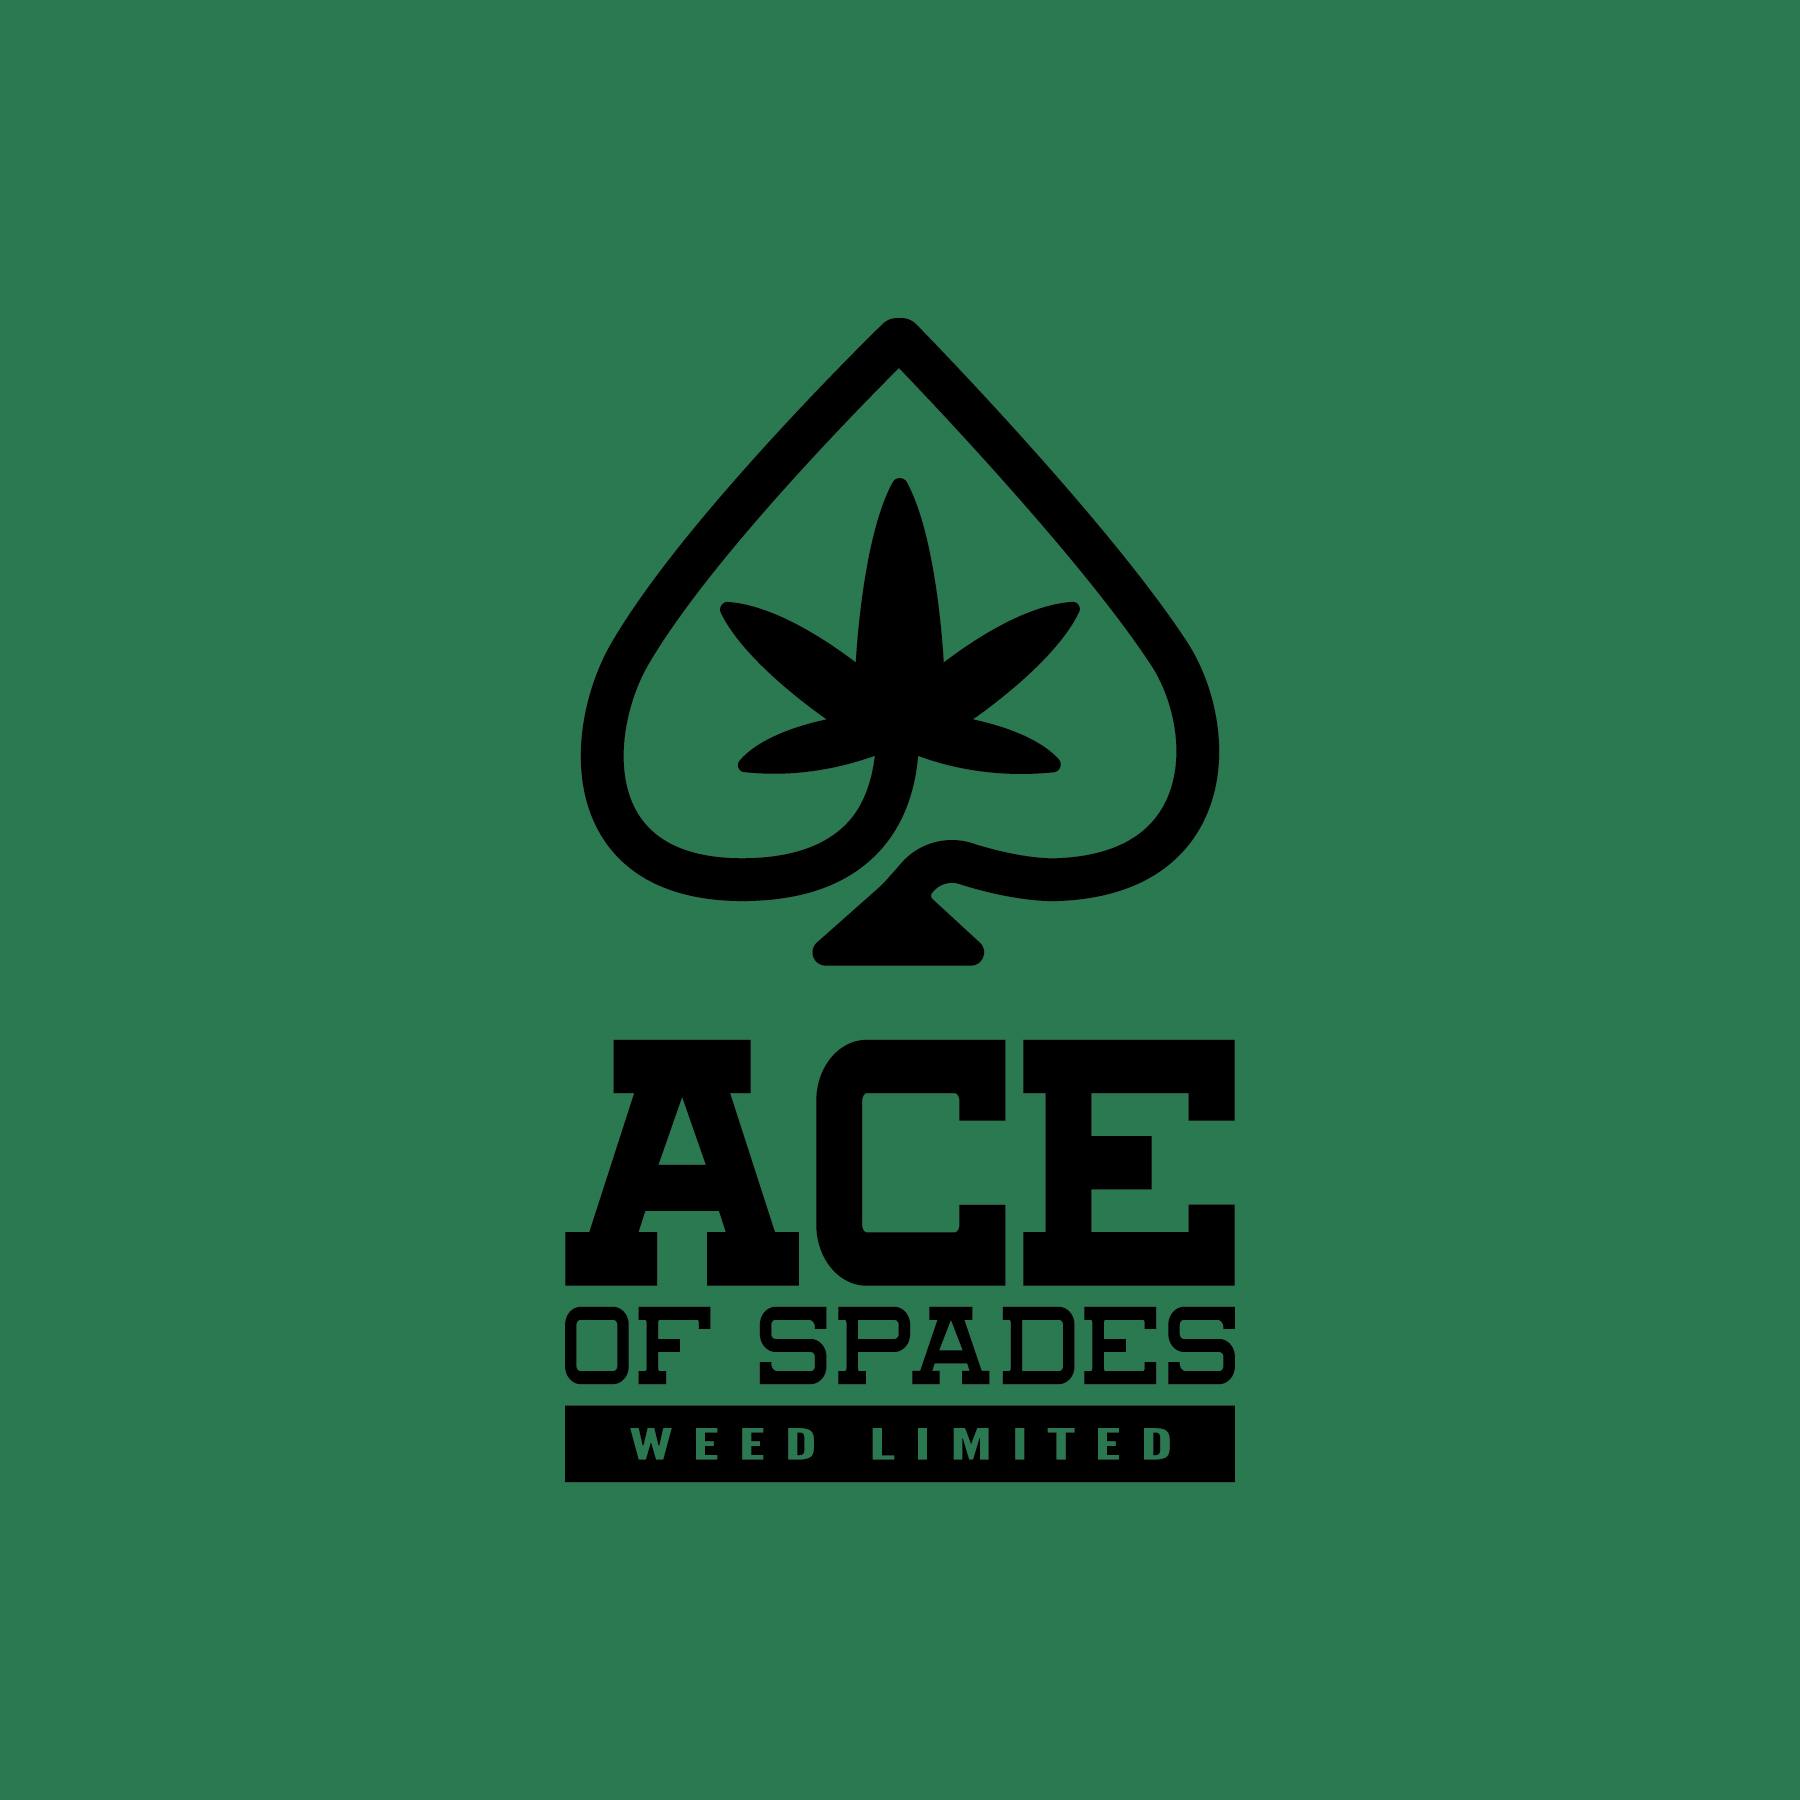 Ace of Spades Weed Limited logo